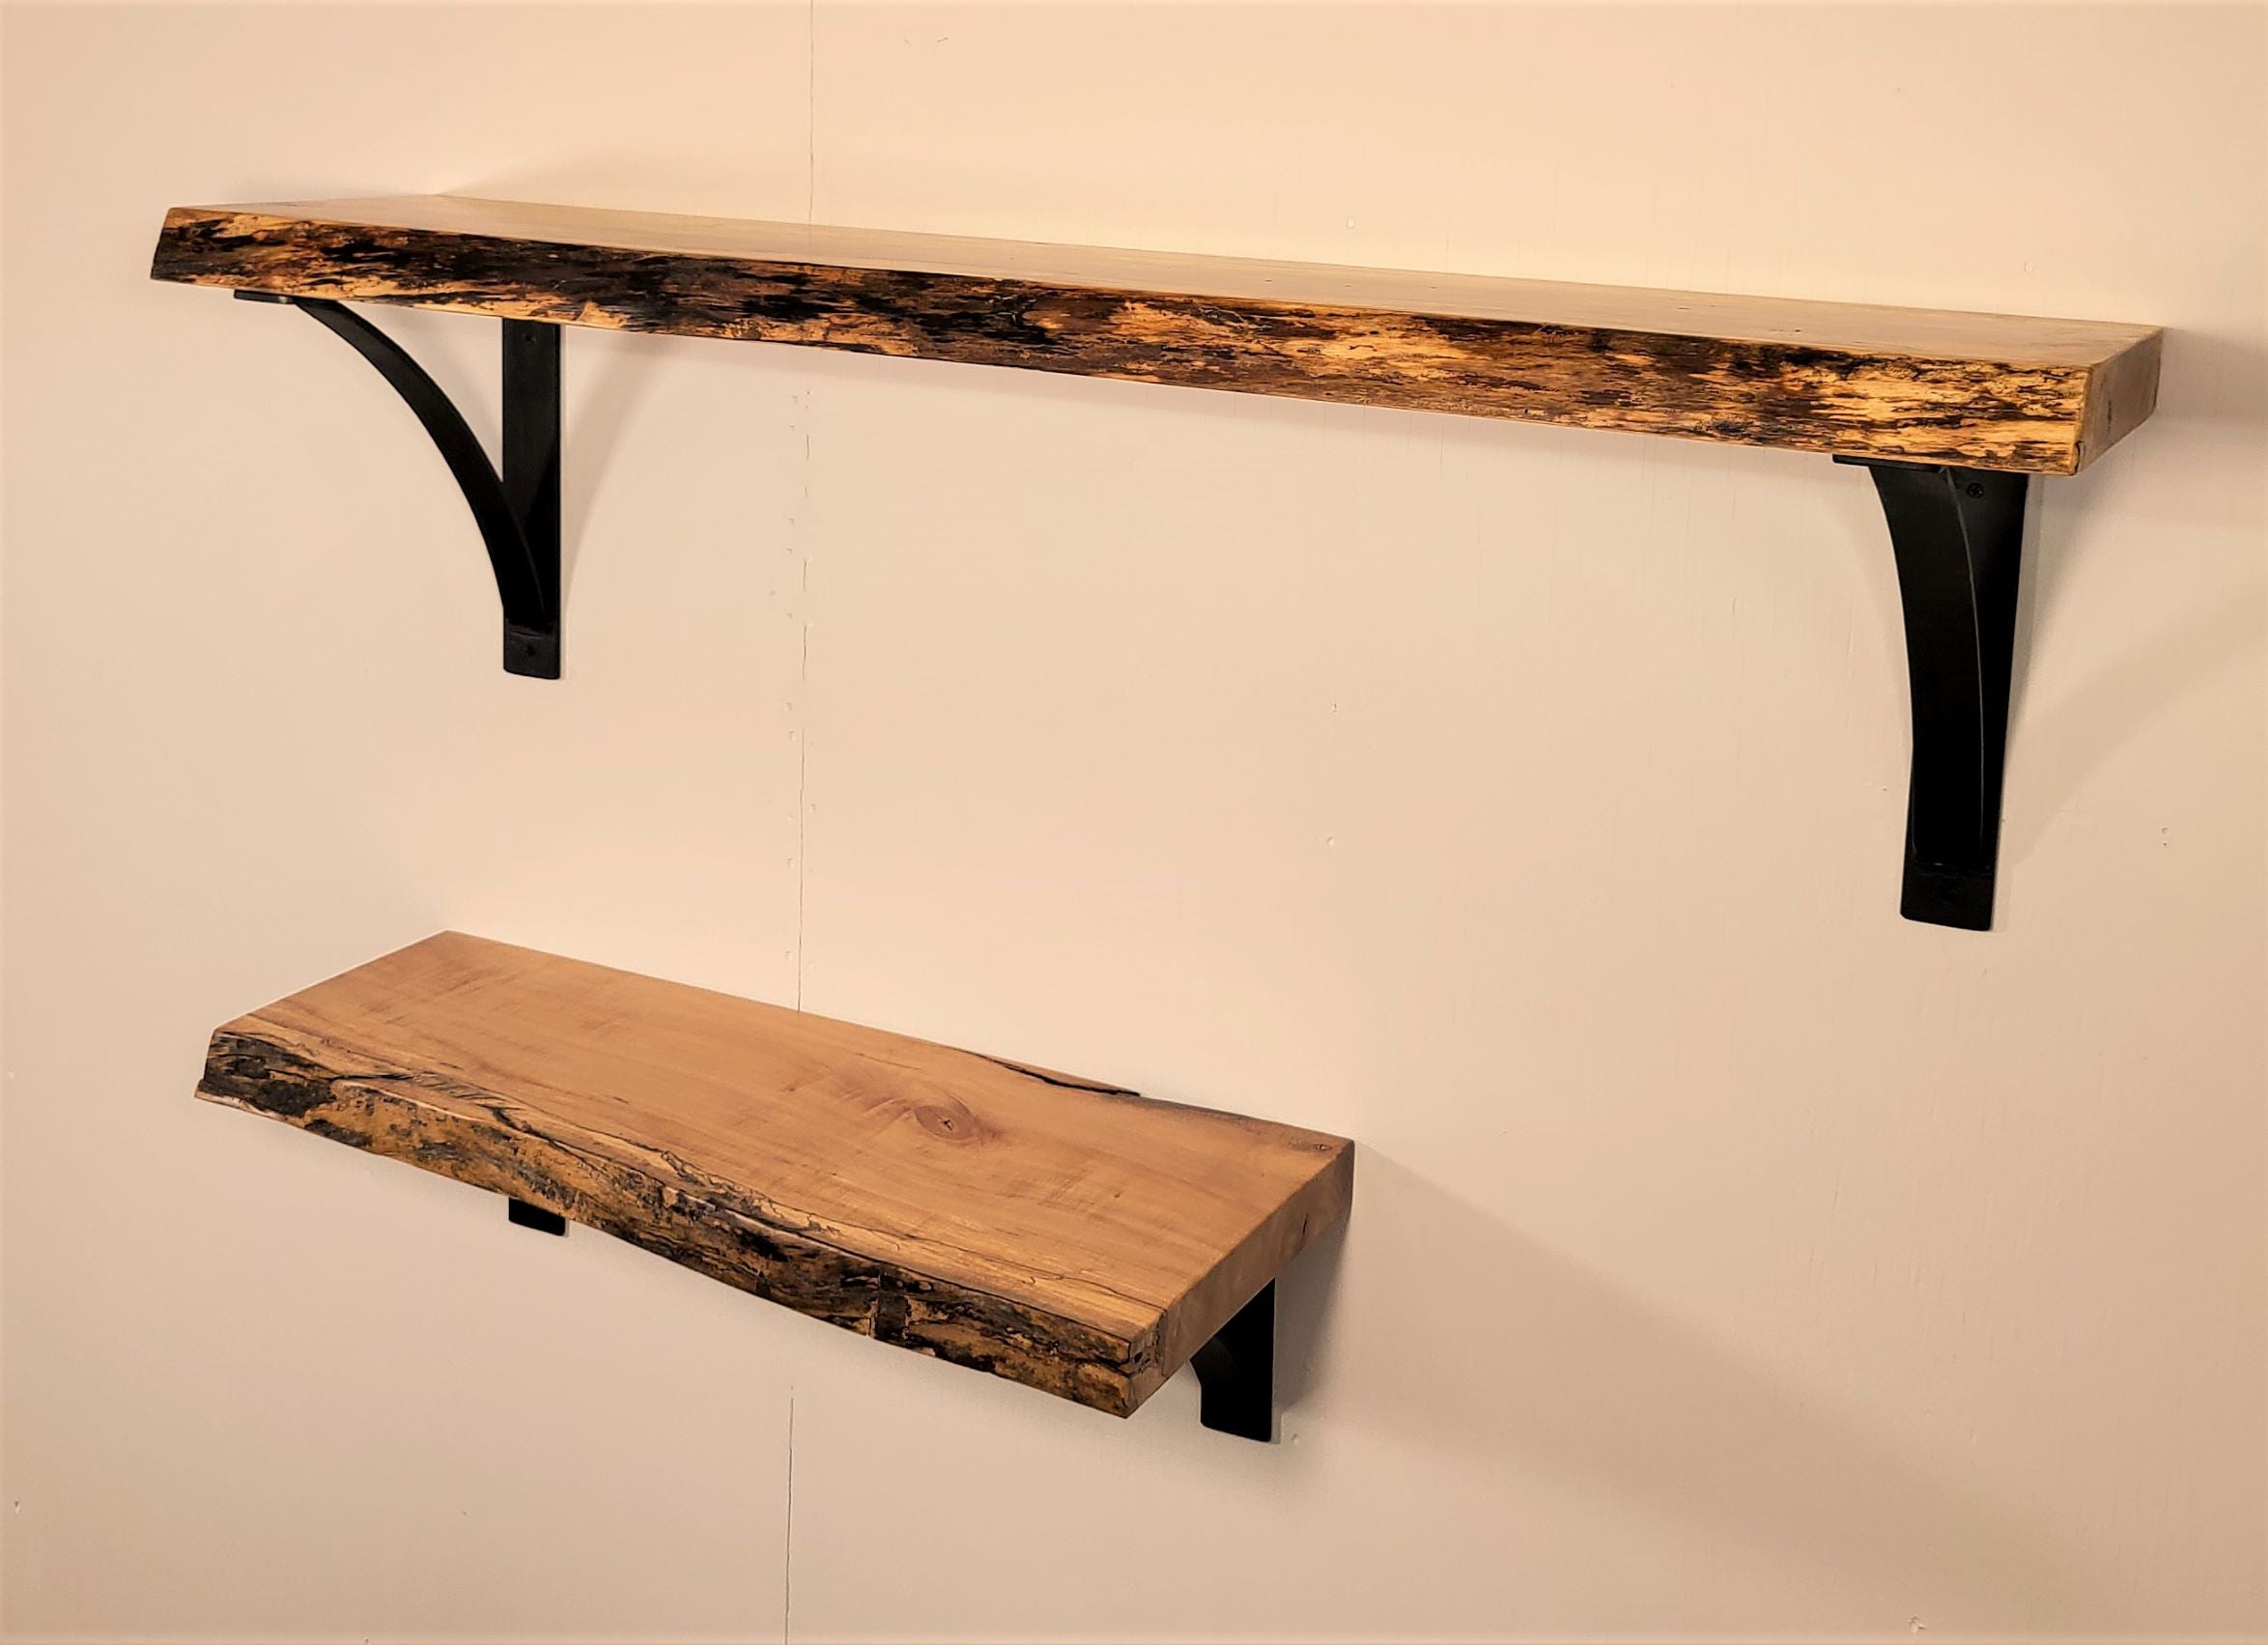 2" Thick Maple Shelf with rustic live edge and heavy-duty steel brackets